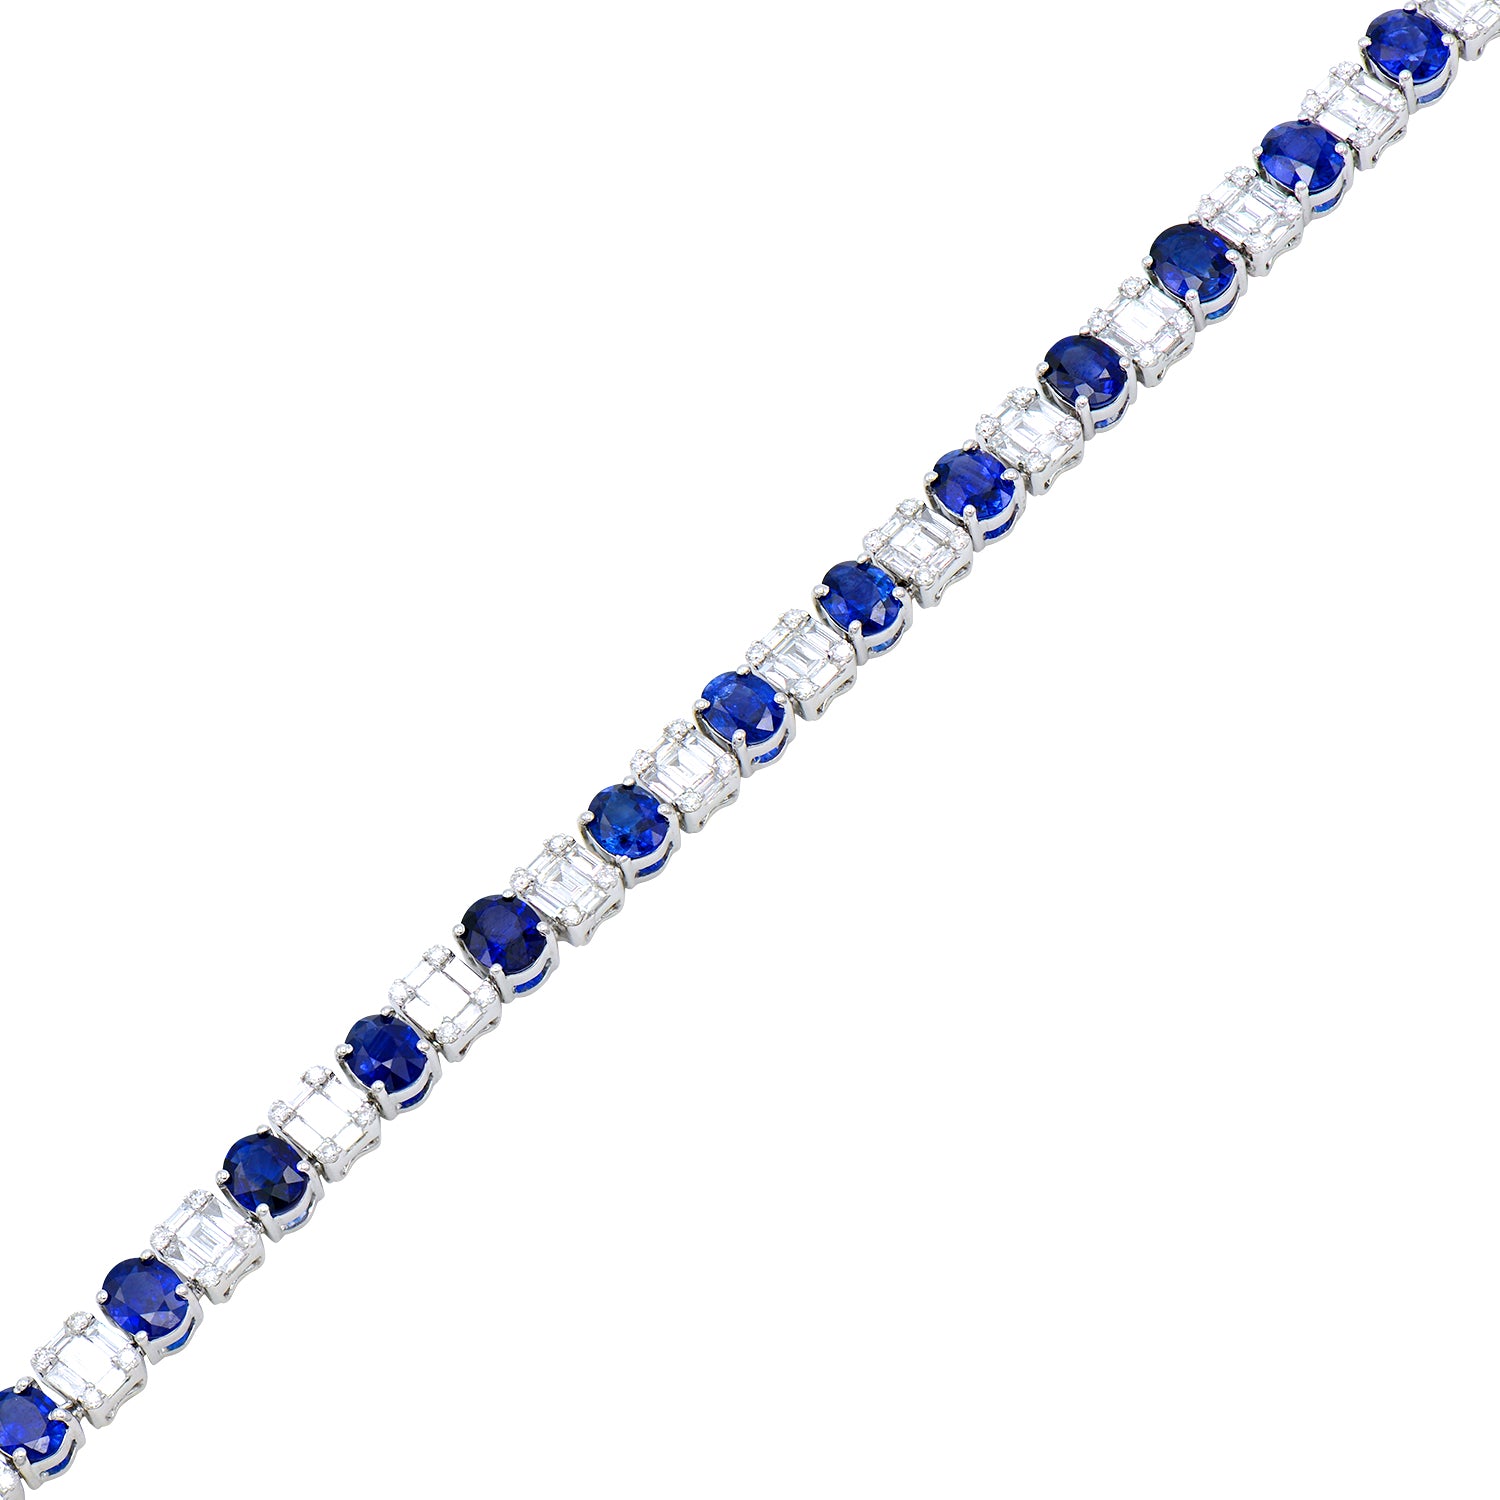 Necklace 18KW/30.7G 49SAPP-22.62CT 245BD-5.9CT 196RD-1.28CT